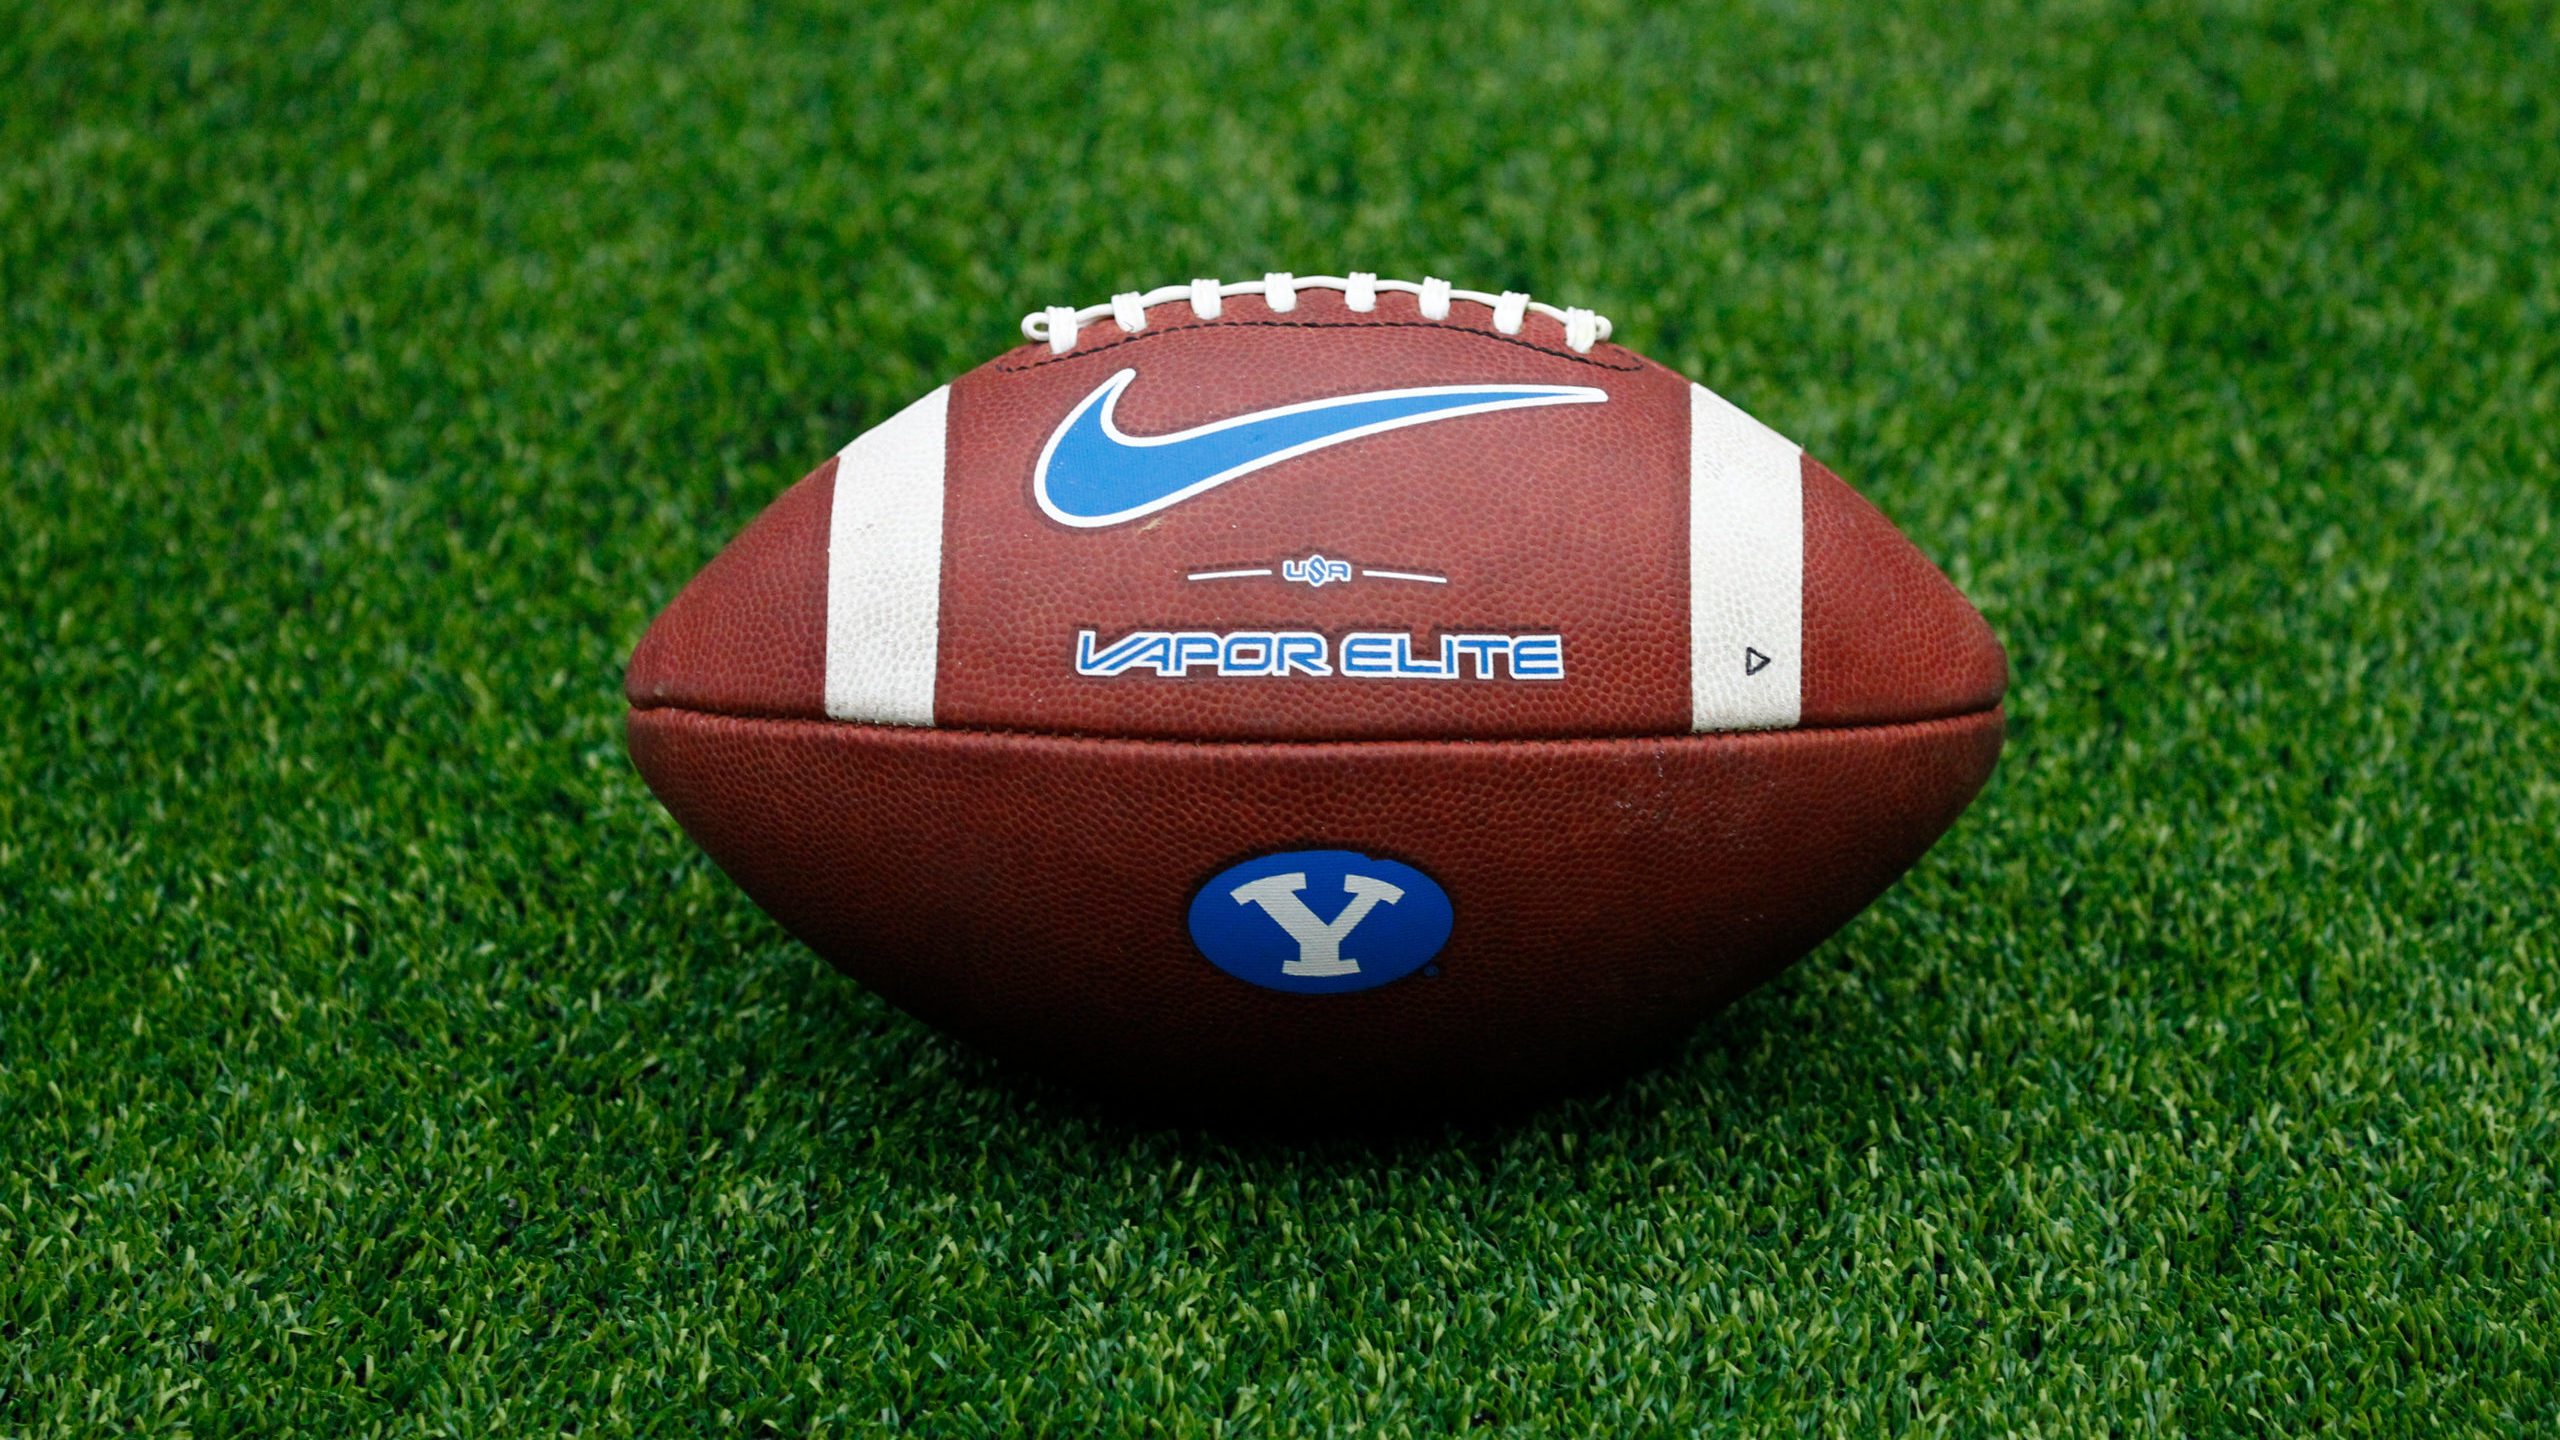 A detail view of a Nike Vapor Elite college football with a BYU logo on the artificial turf prior t...